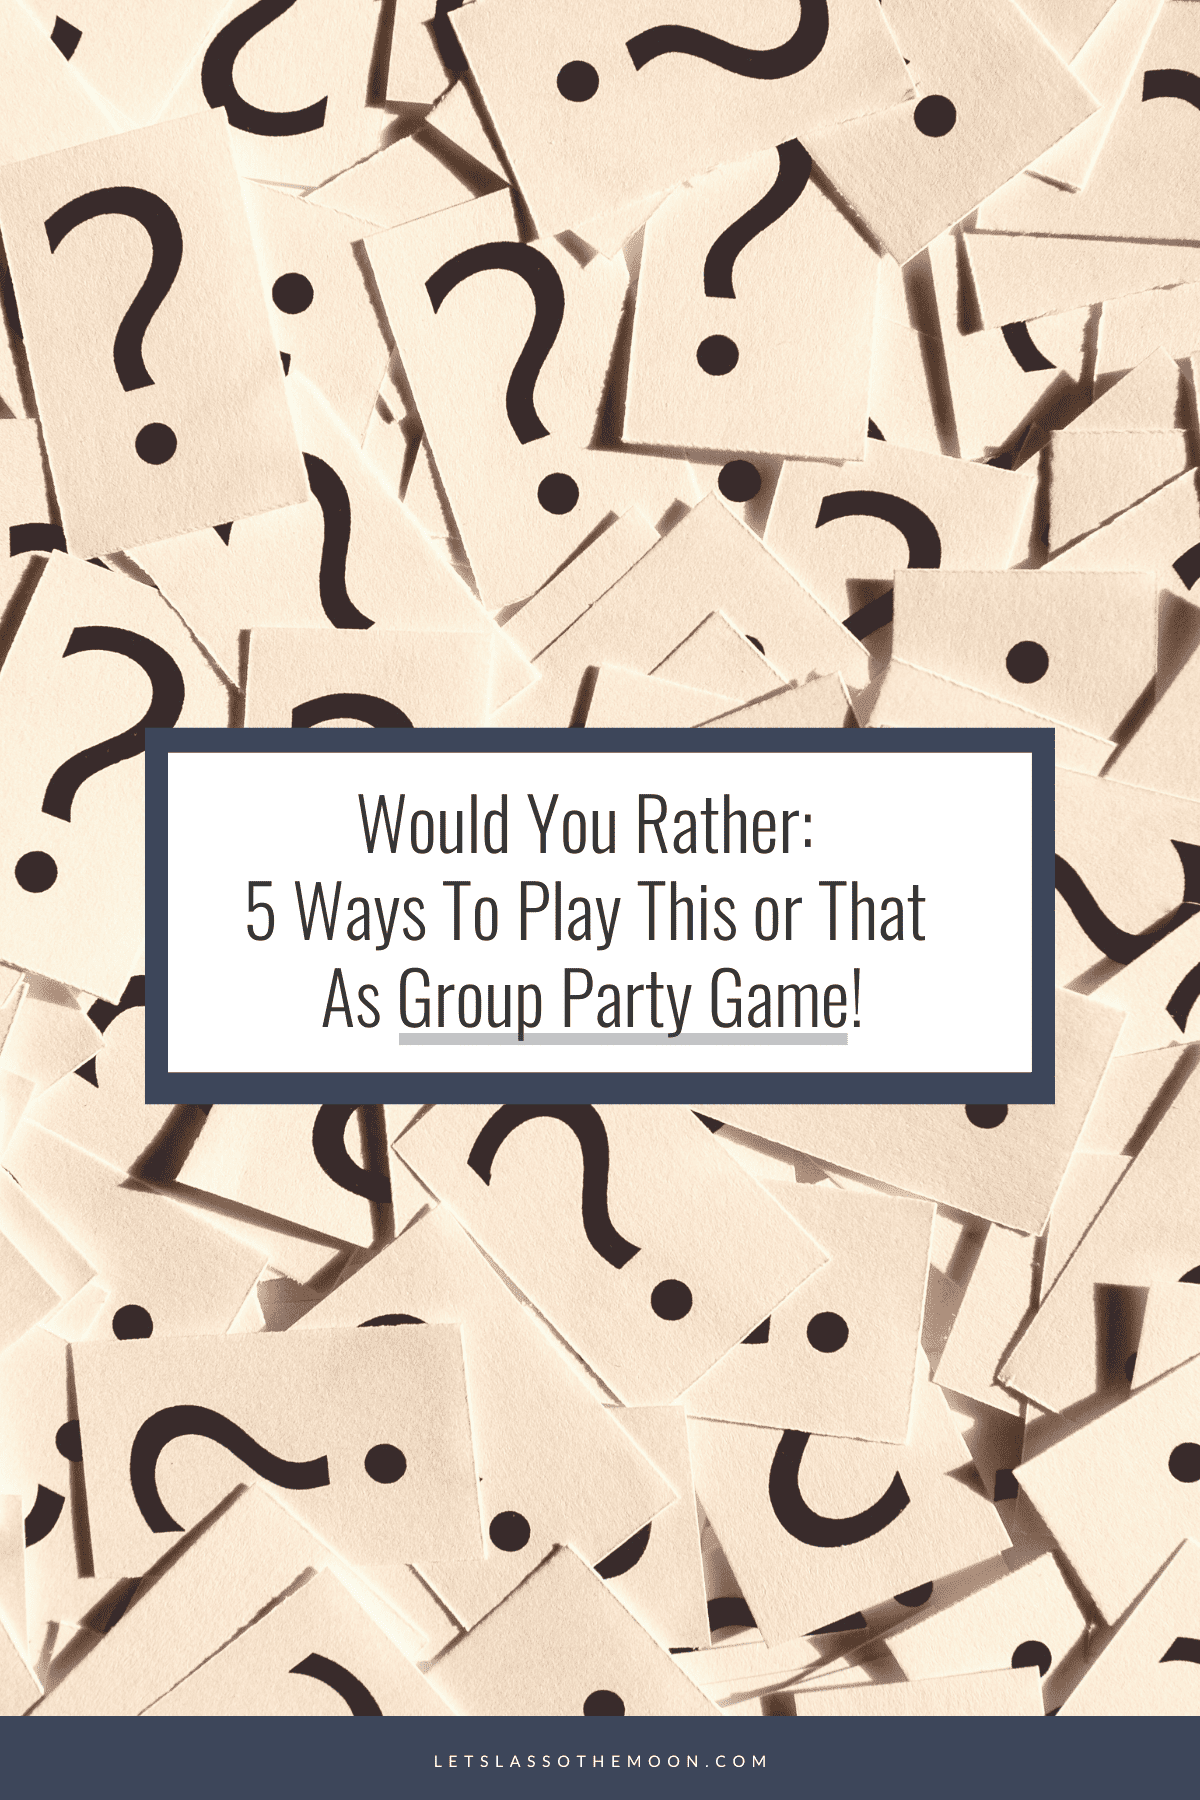 Pin for Pinterest with the title, "Would You Rather: 5 Ways To Play This or That As Group Party Game!"